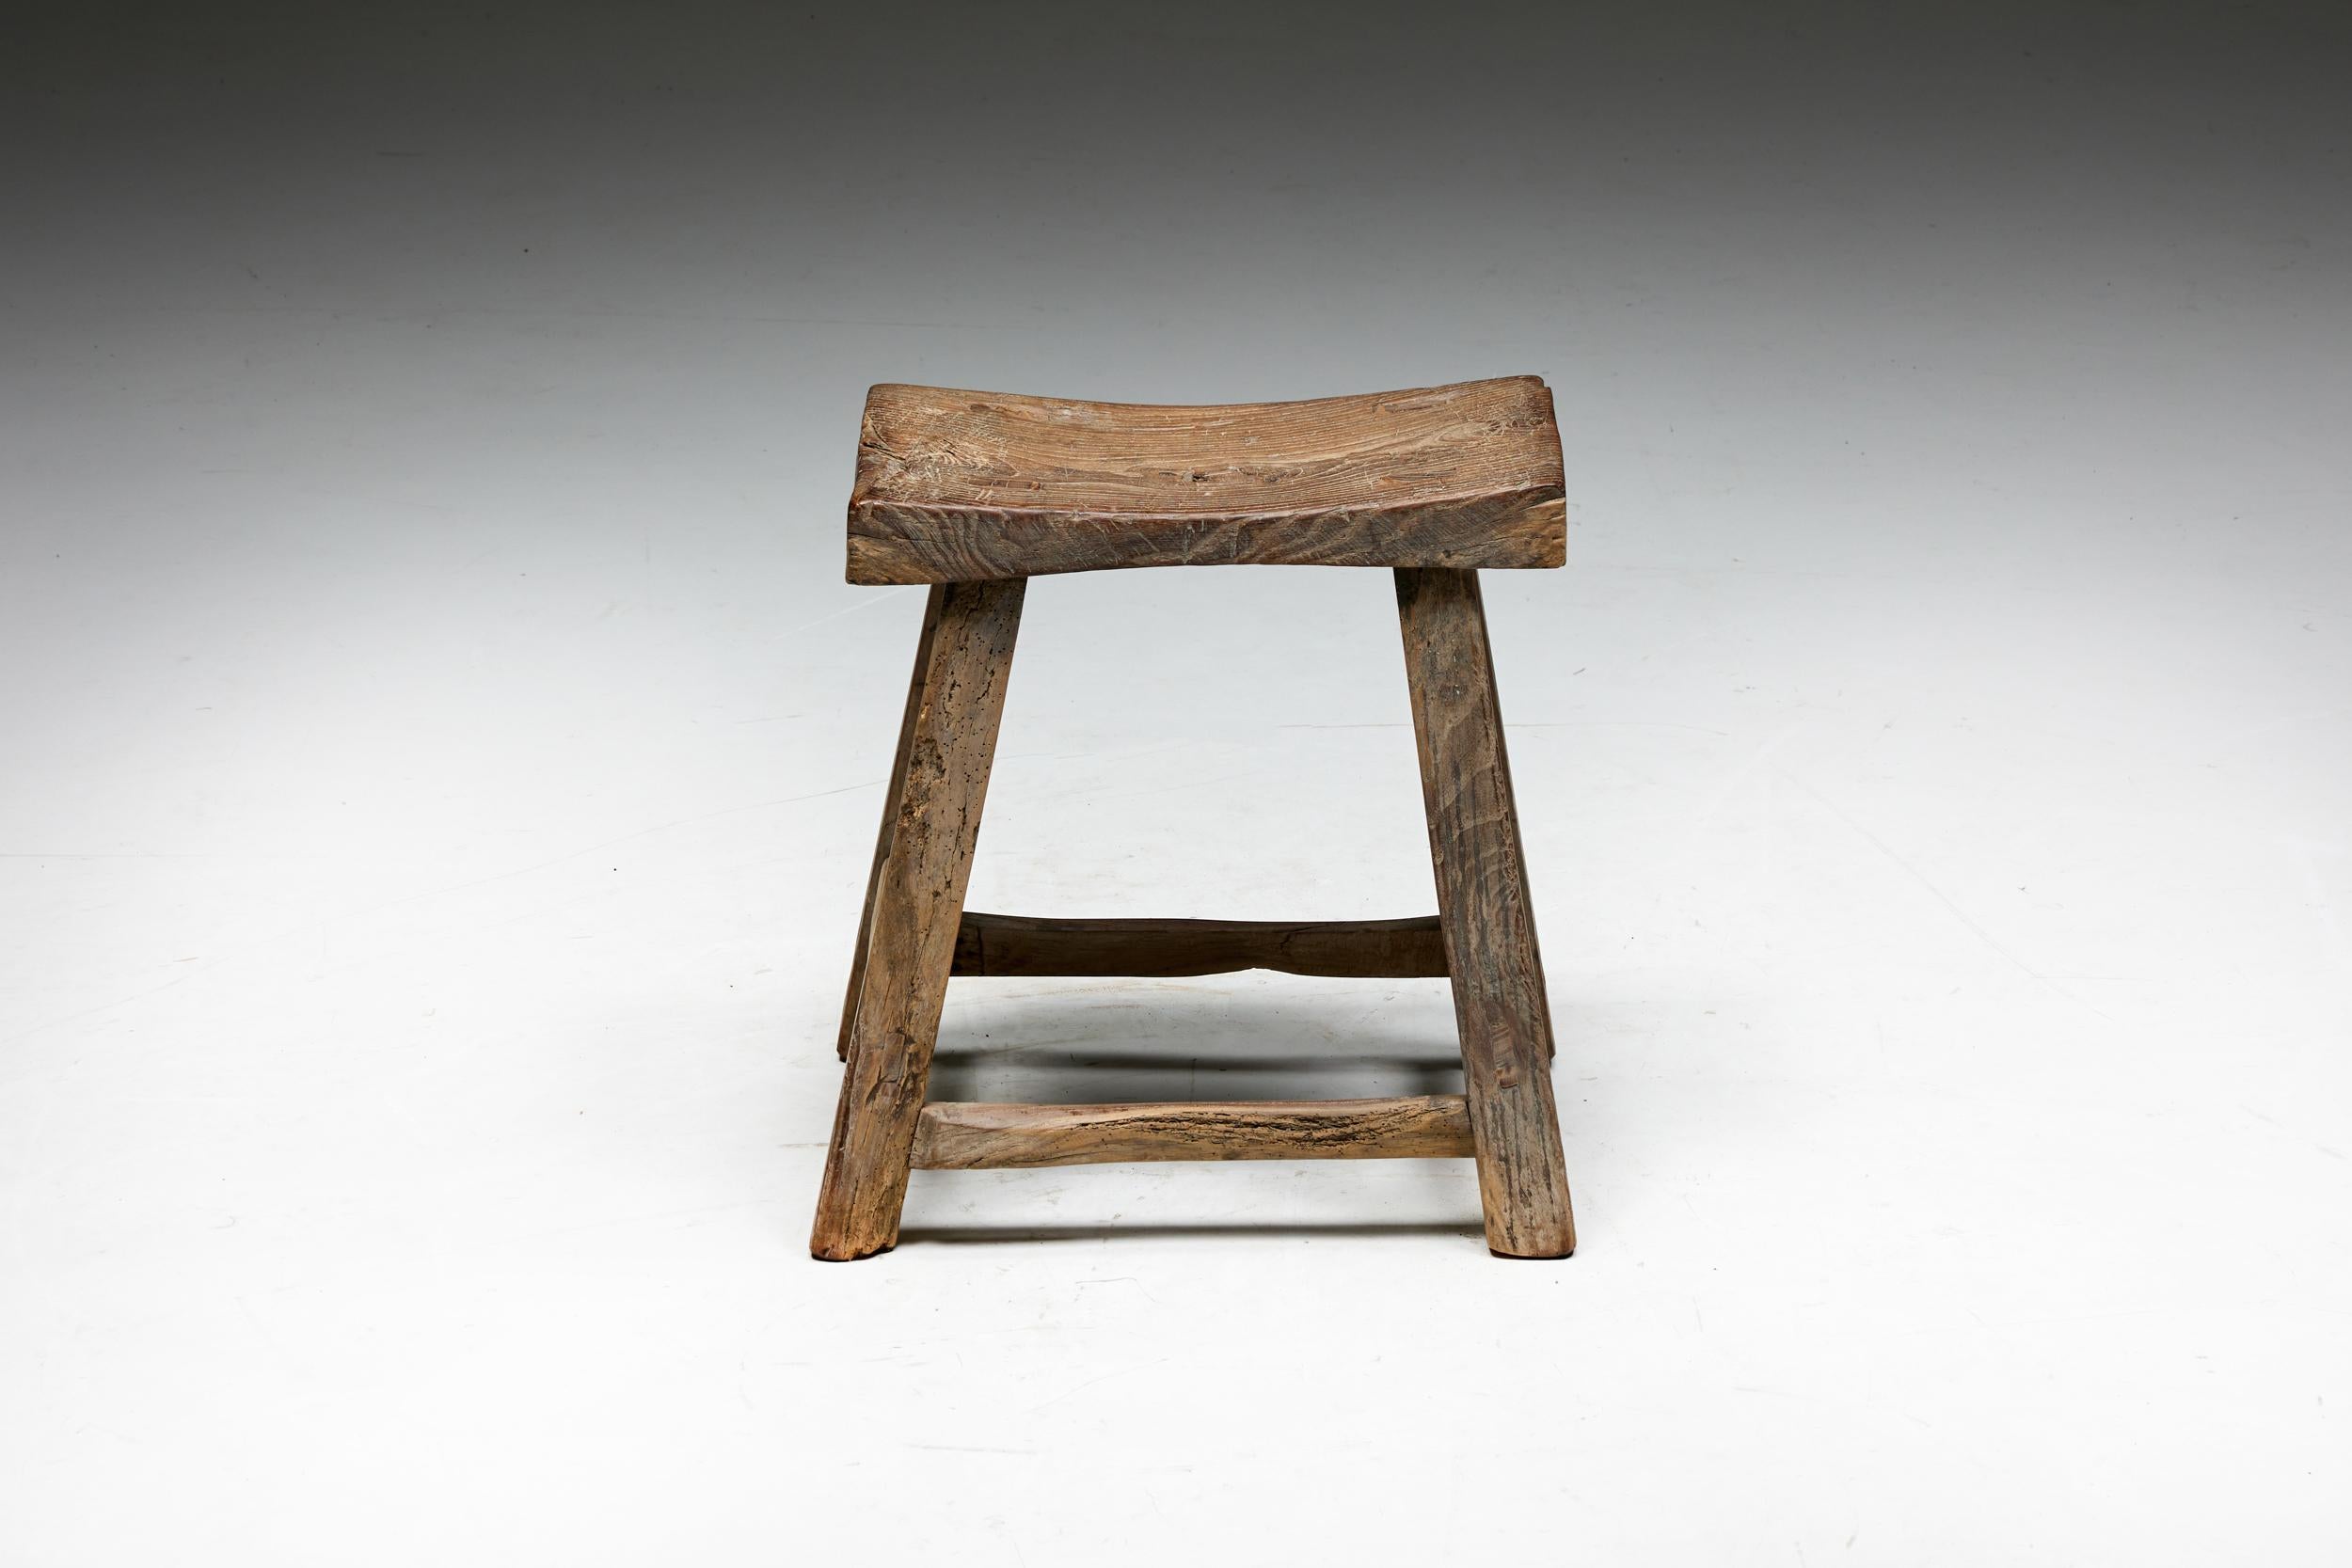 Travail Populaire; Art Populaire; Folk Art; Monoxylite; Stool; France; 20th Century; Rustic;

Rustic travail populaire stool, a charming piece that effortlessly transports you to the early 20th century France. Crafted with meticulous attention to